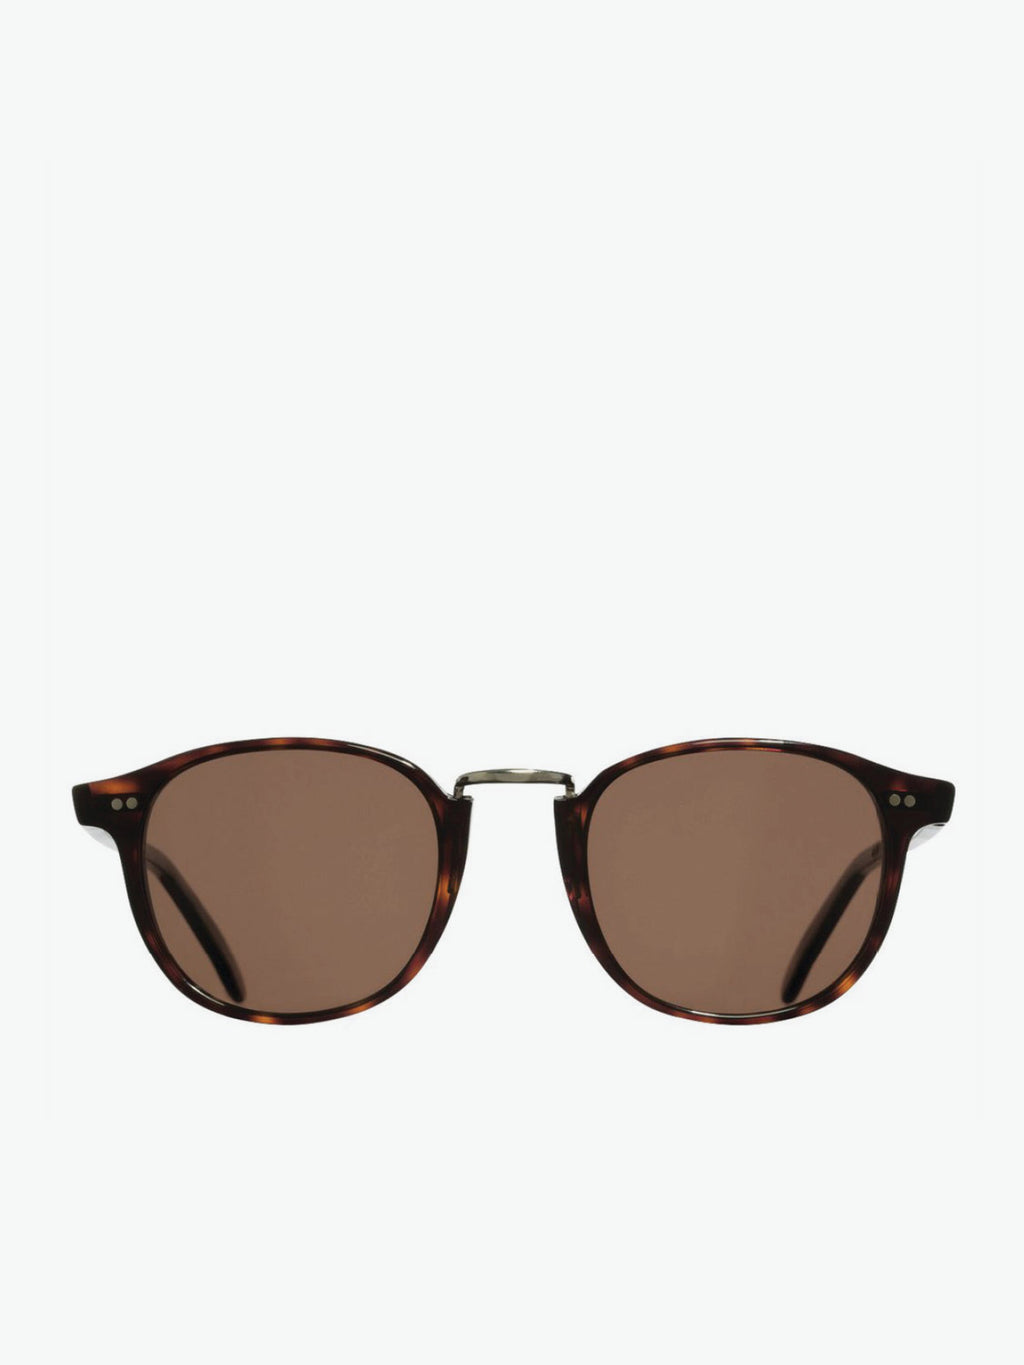 Cutler and Gross Round-Frame Dark Turtle Acetate Sunglasses | A